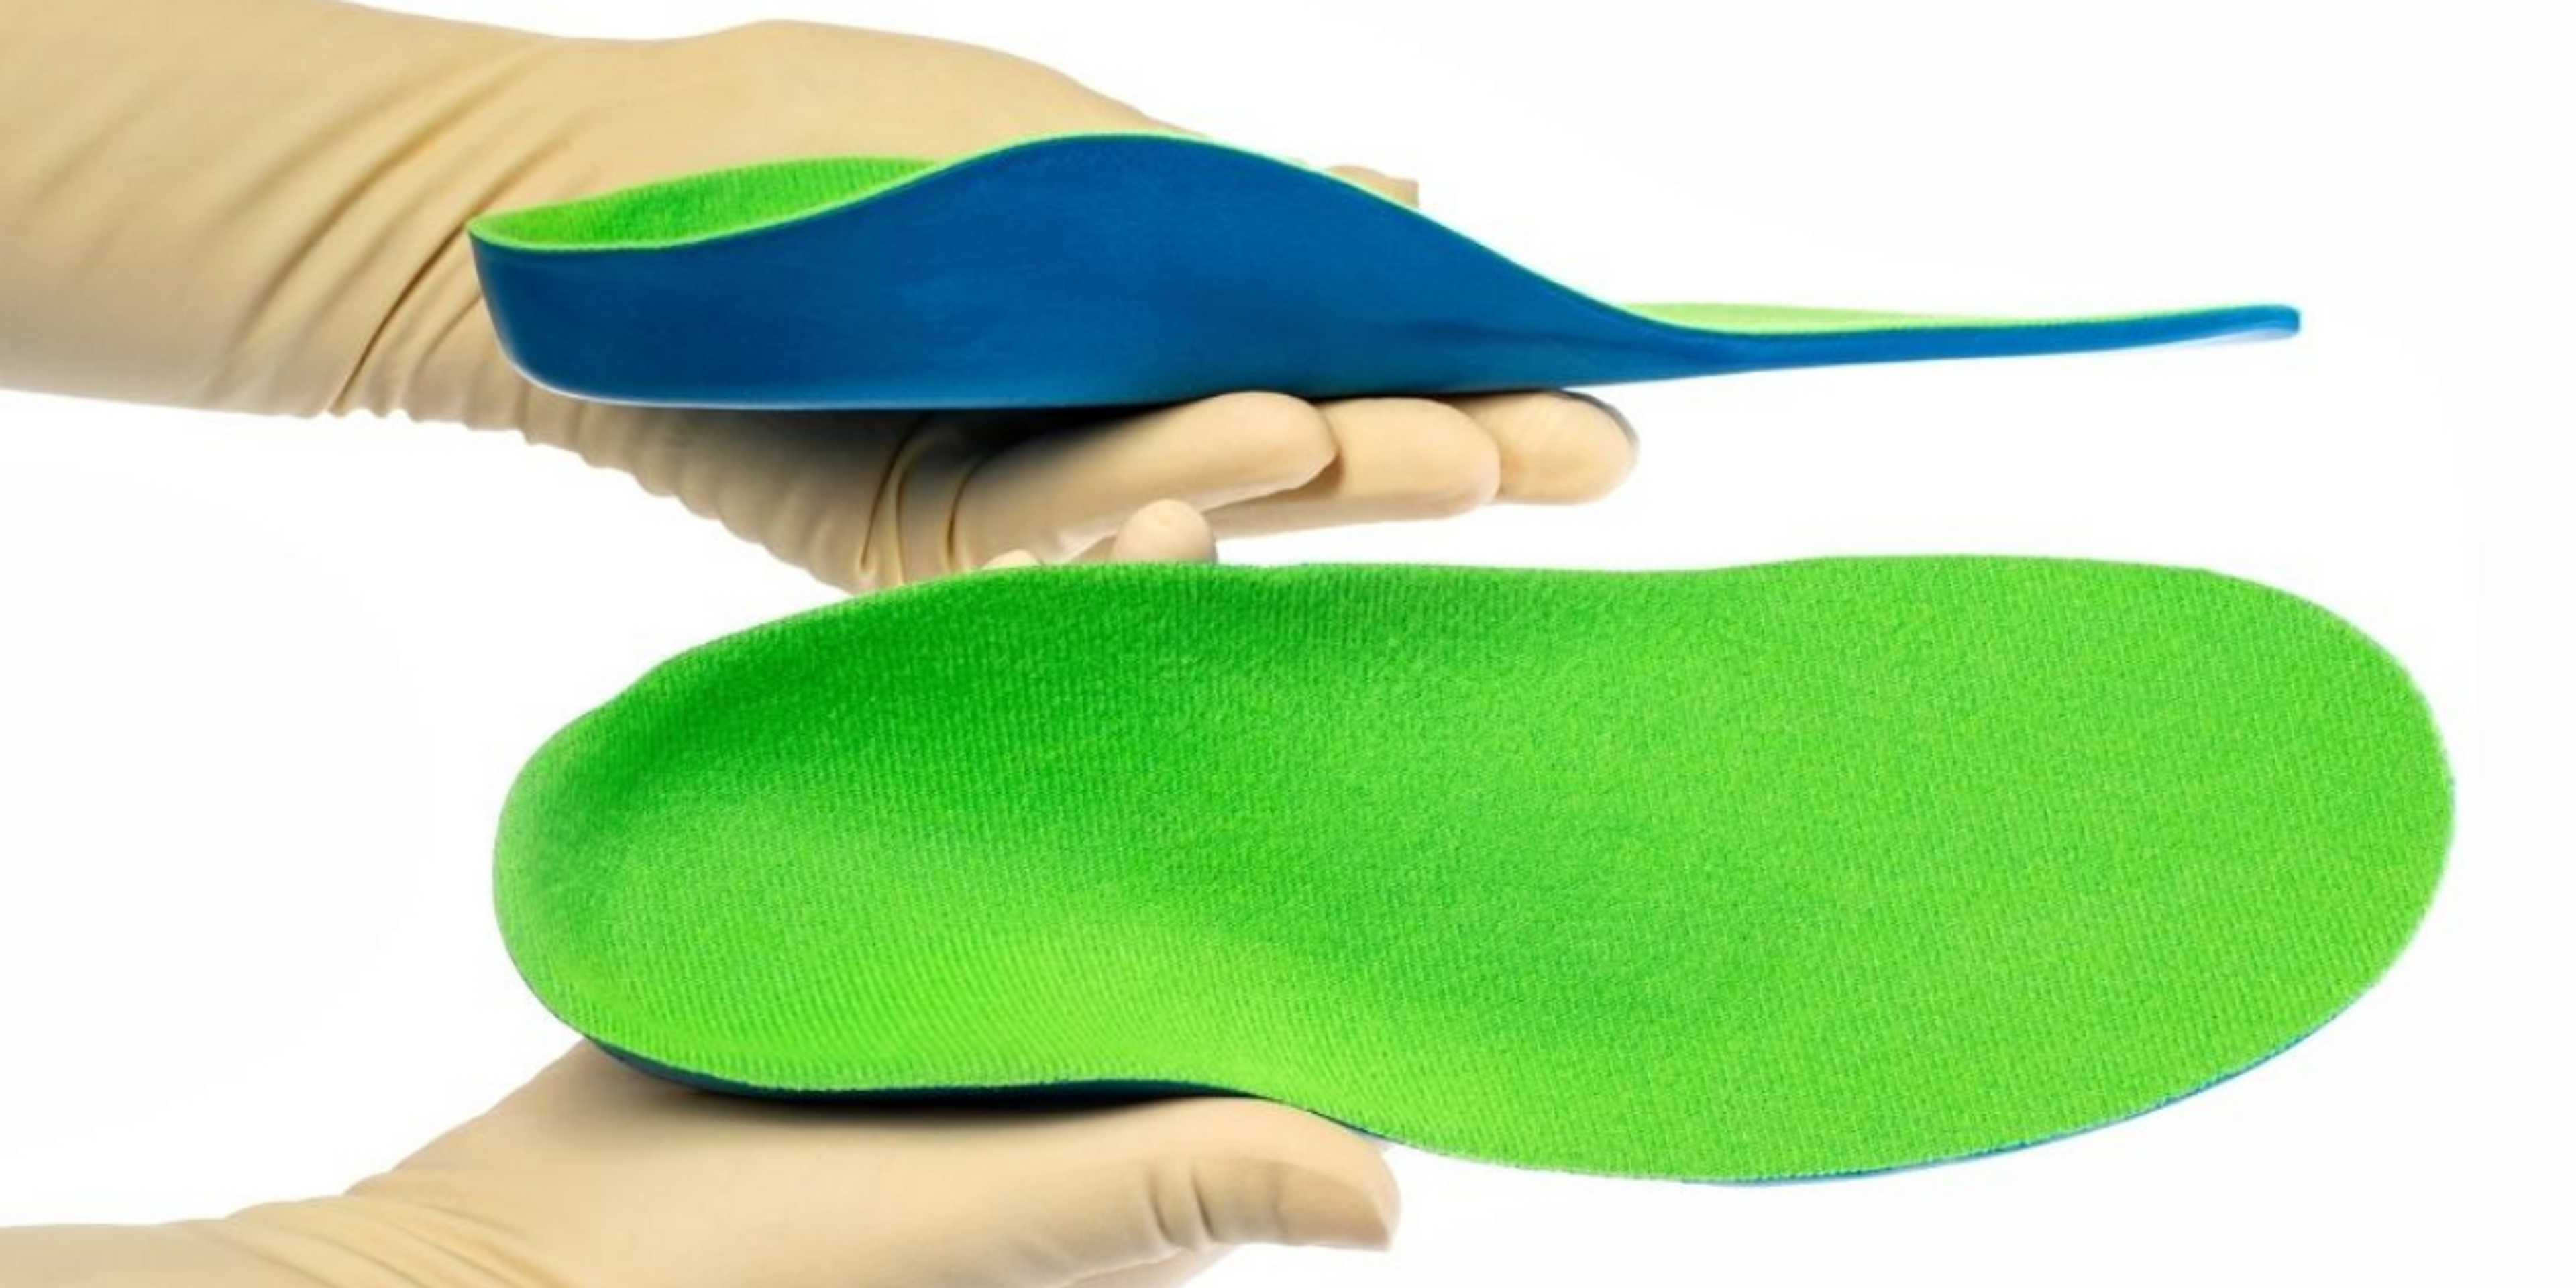 Insoles comes in different shapes and sizes and are designed to support and cushion the foot.